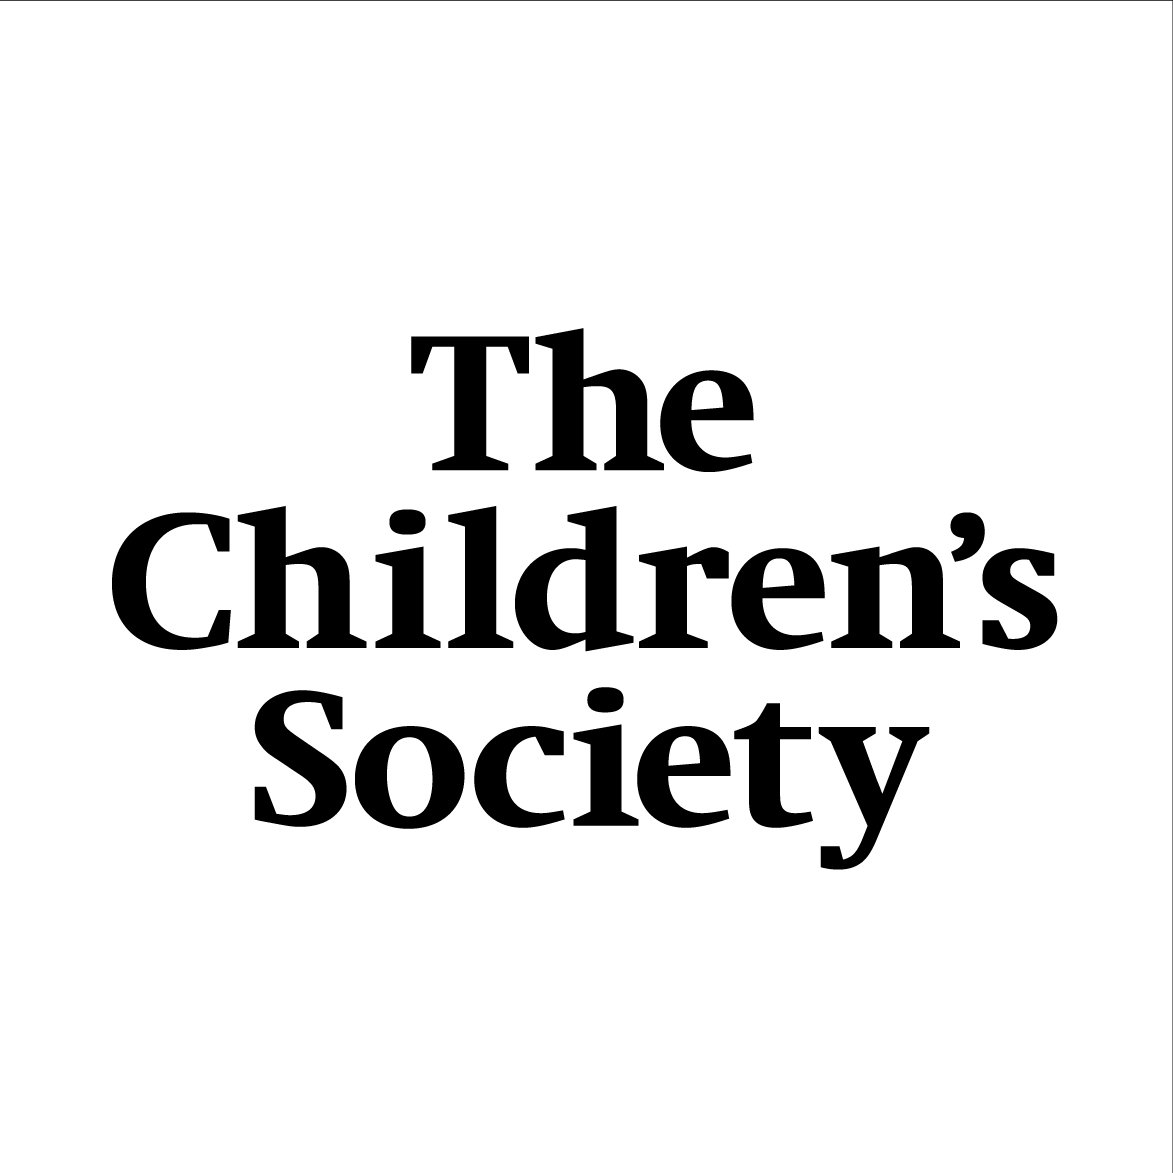 The @childrensociety in Essex
We fight for hope by deeply understanding the needs of young people and supporting them through their most serious life challenges